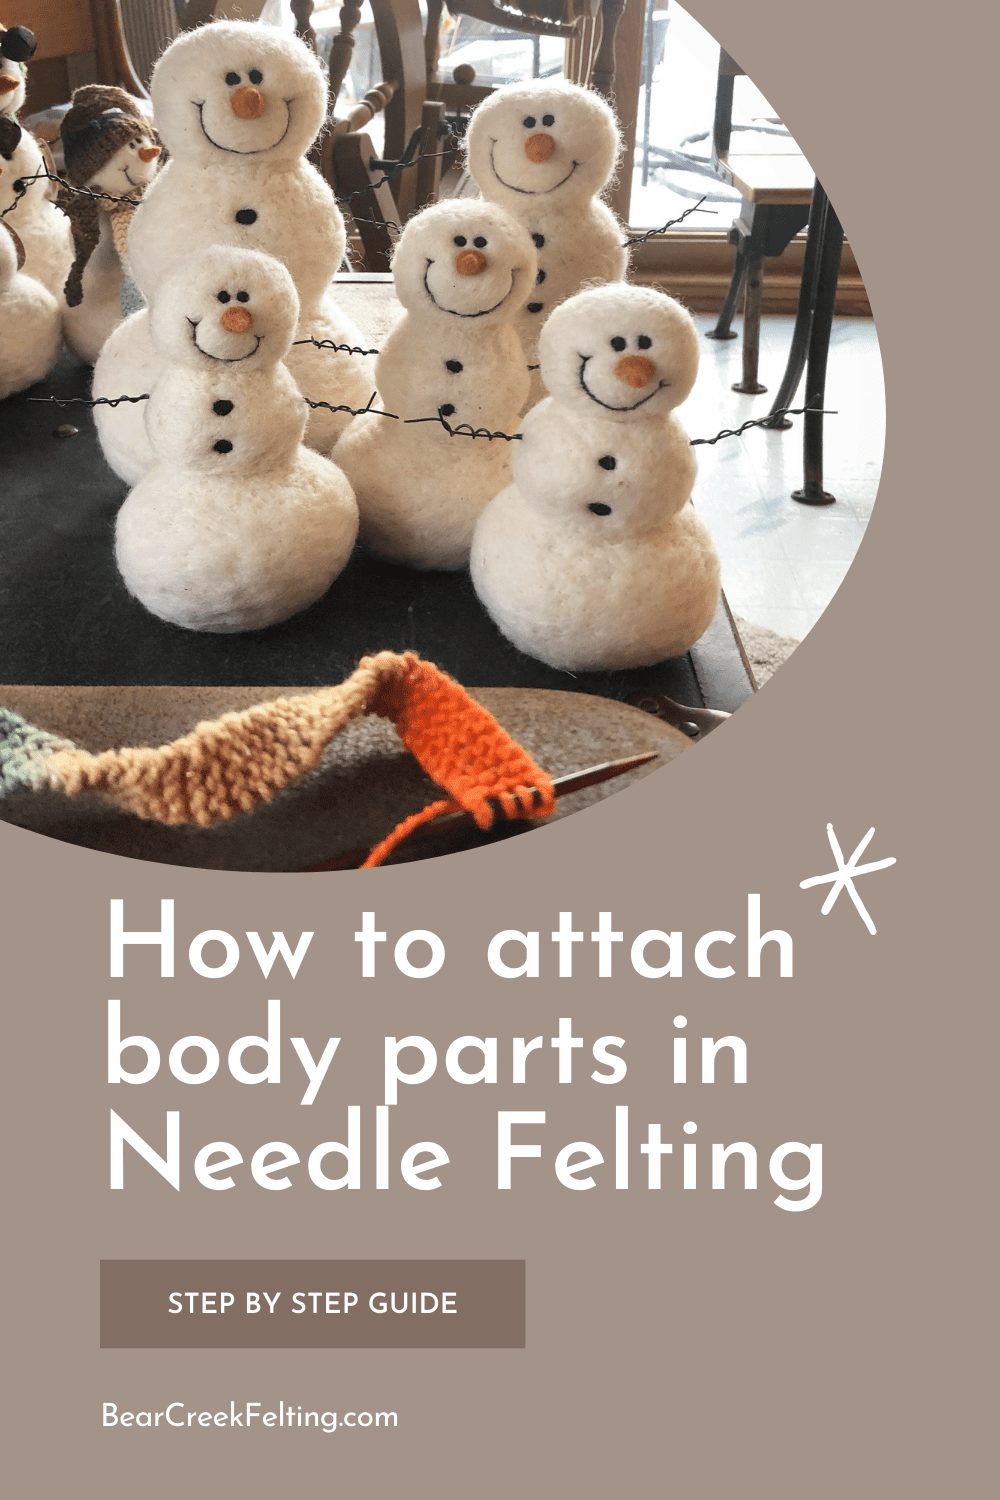 Needle Felting Is The Perfect Low-Cost Winter Craft! - Hobby Farms